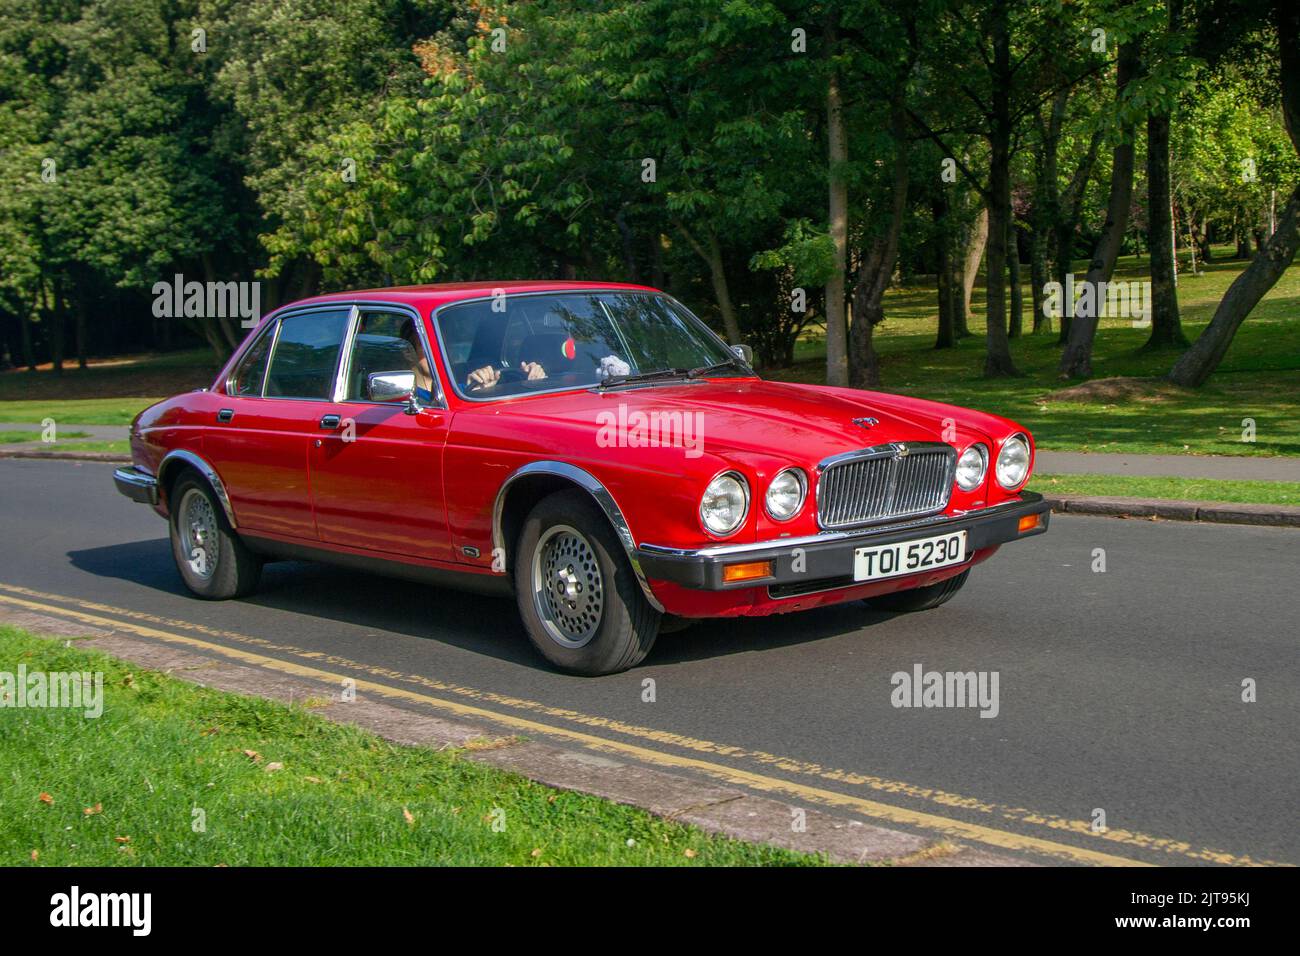 1983 80s eighties red JAGUAR, 4.2 Xj6 Auto saloon V6 Auto 4235cc Petrol British sports car; arriving at the annual Stanley Park Classic Car Show in the Italian Gardens. Stanley Park classics yesteryear Motor Show Hosted By Blackpool Vintage Vehicle Preservation Group, UK. Stock Photo